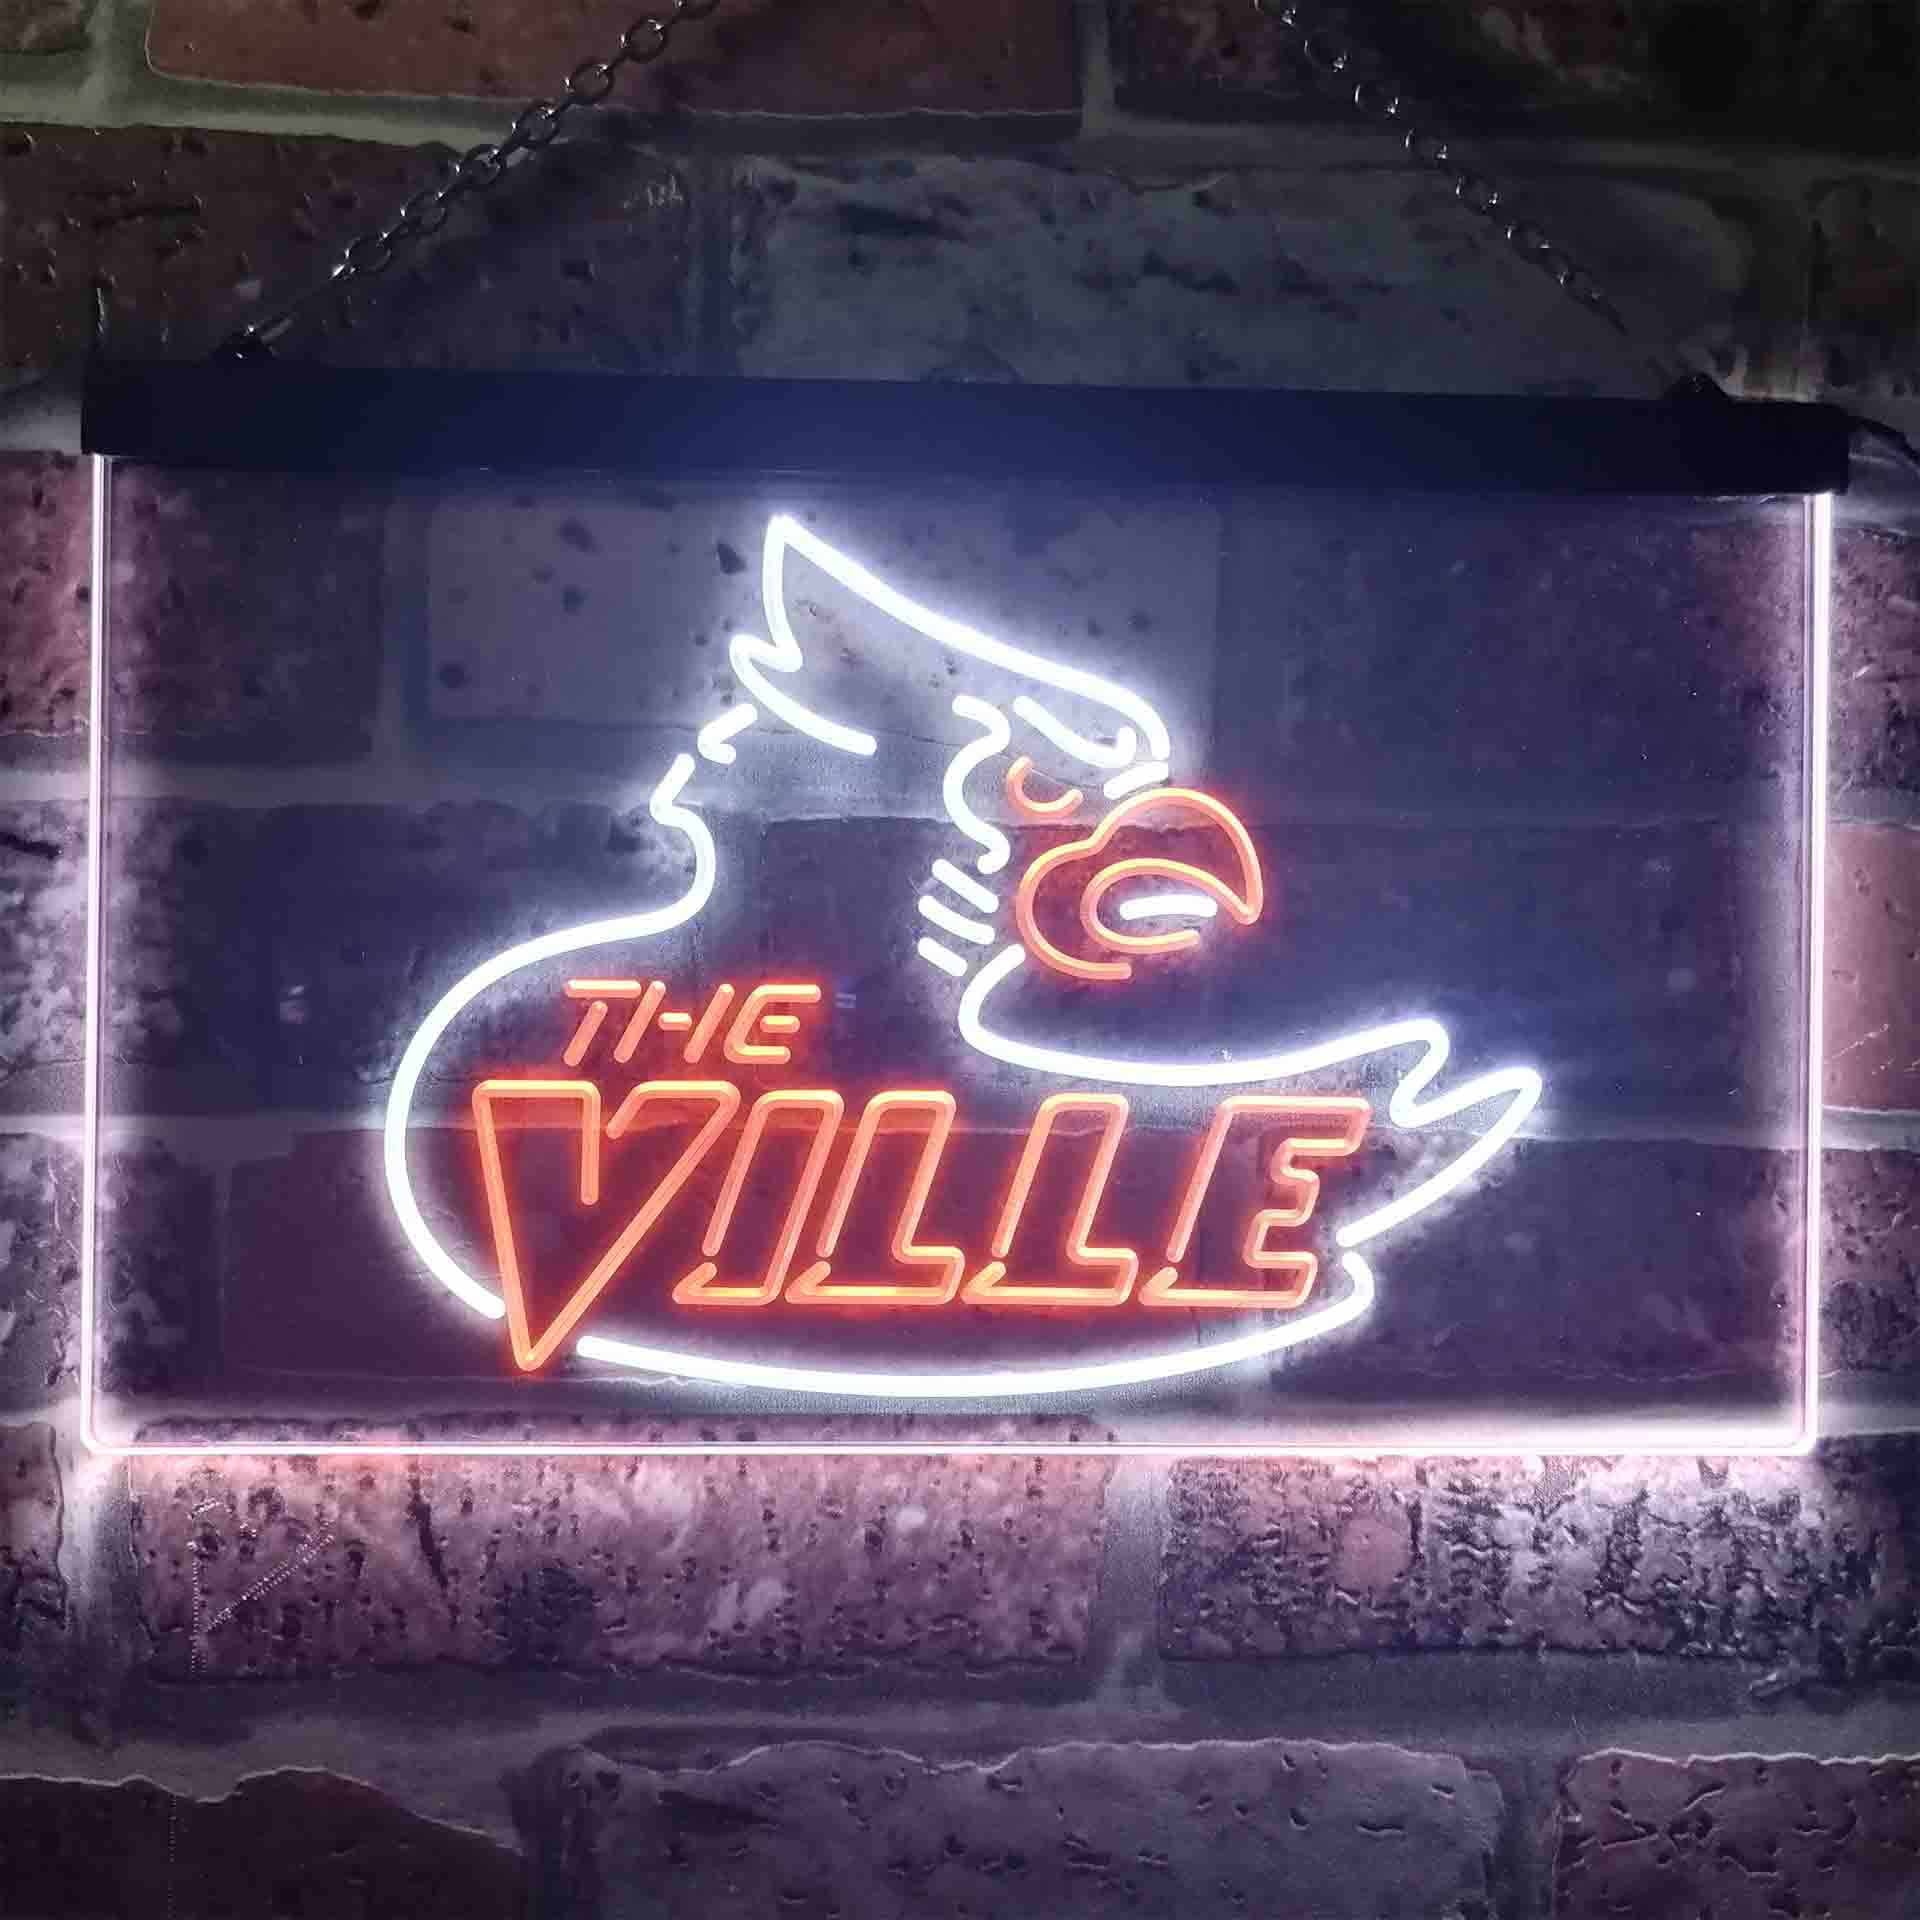 Louisville Basketball LED Neon Sign in 2023